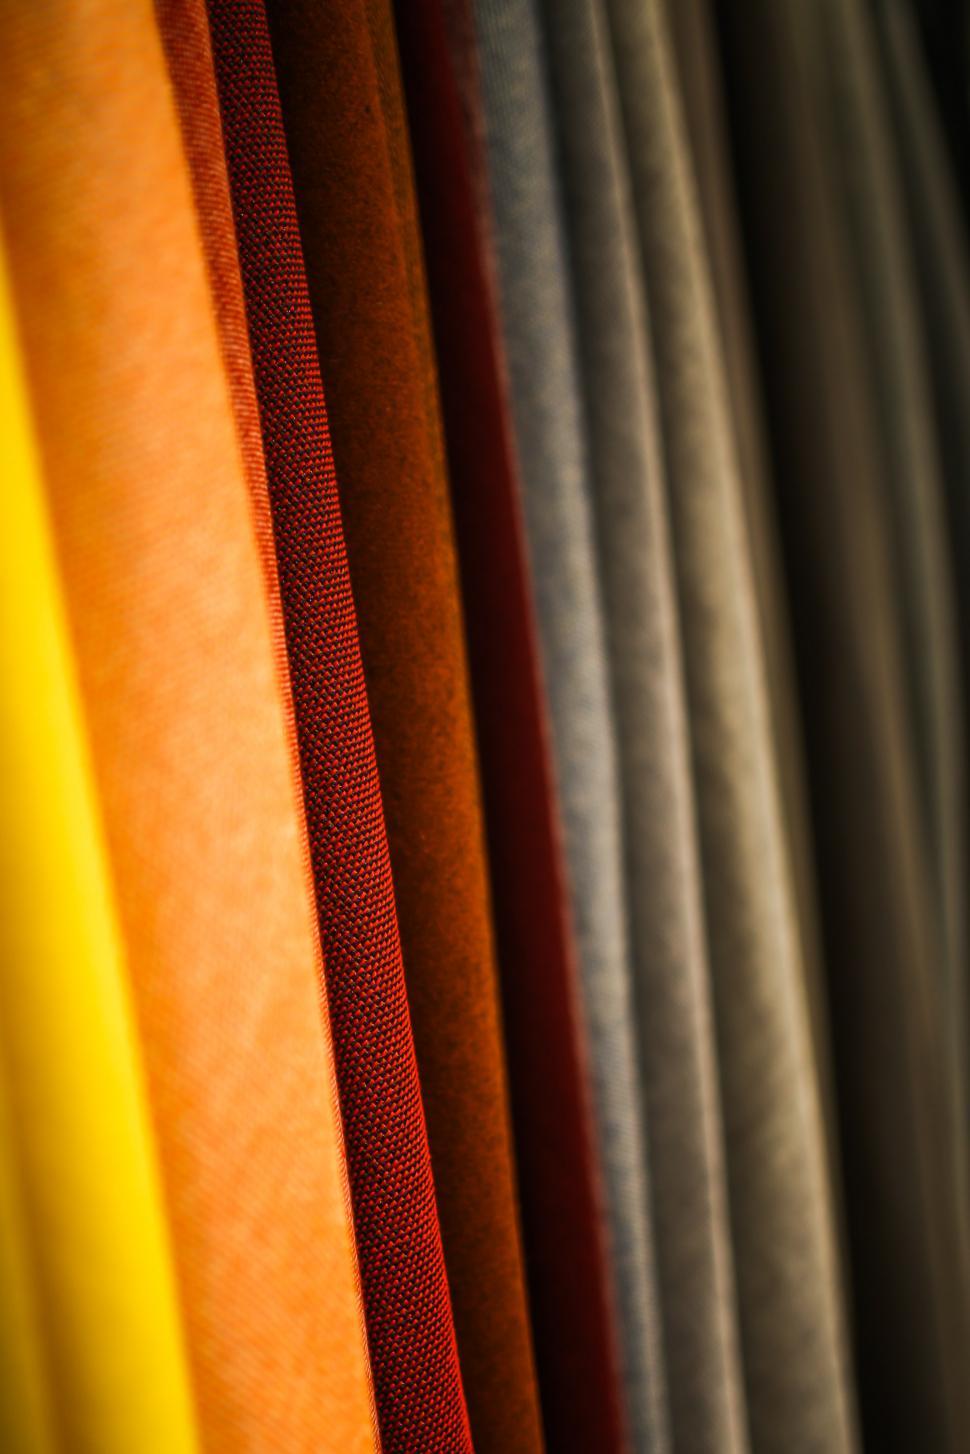 Free Image of Close Up of a Row of Different Colored Fabrics 